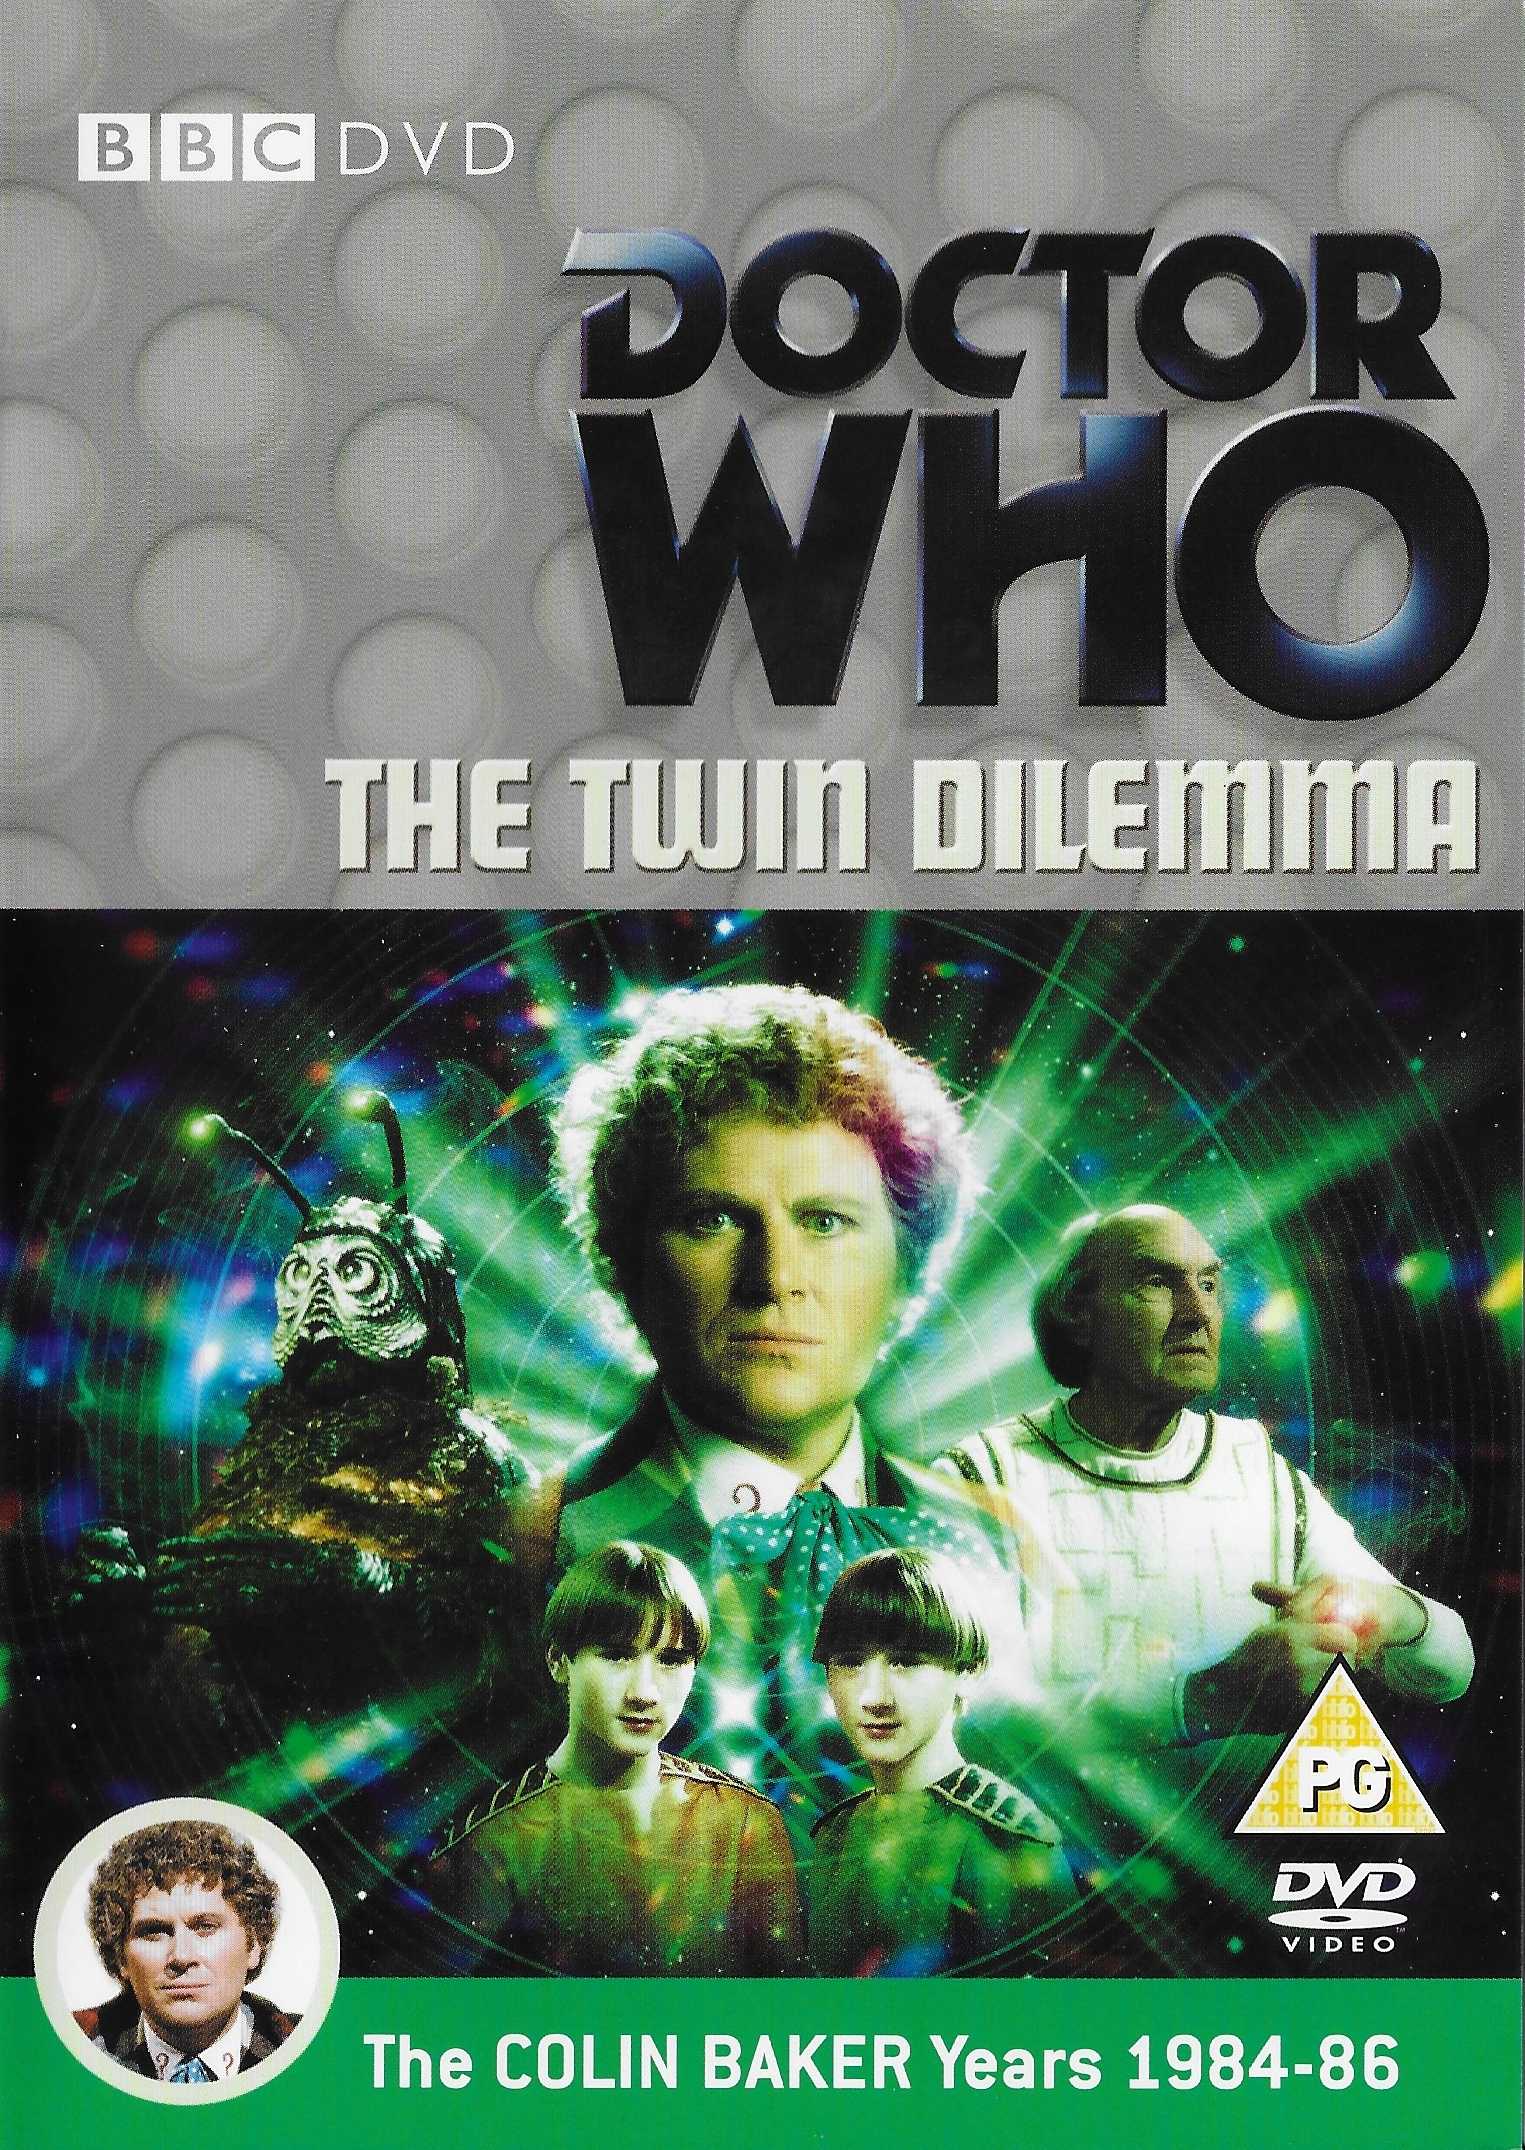 Picture of BBCDVD 2598 Doctor Who - The twin dilemma by artist Anthony Steven from the BBC dvds - Records and Tapes library